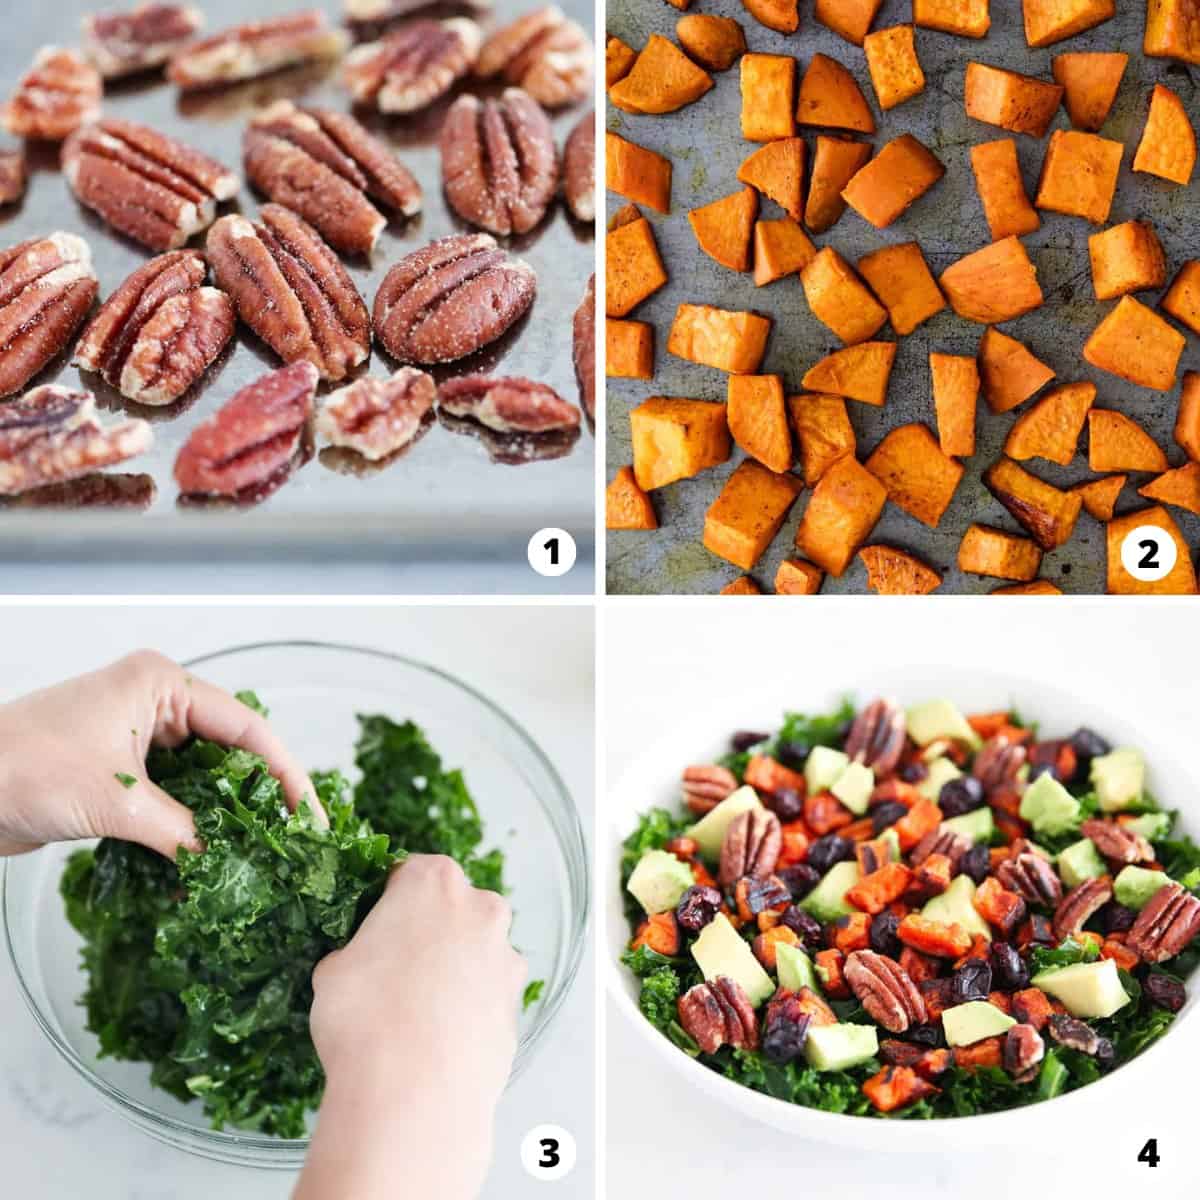 Step by step how to make sweet potato salad photo collage.